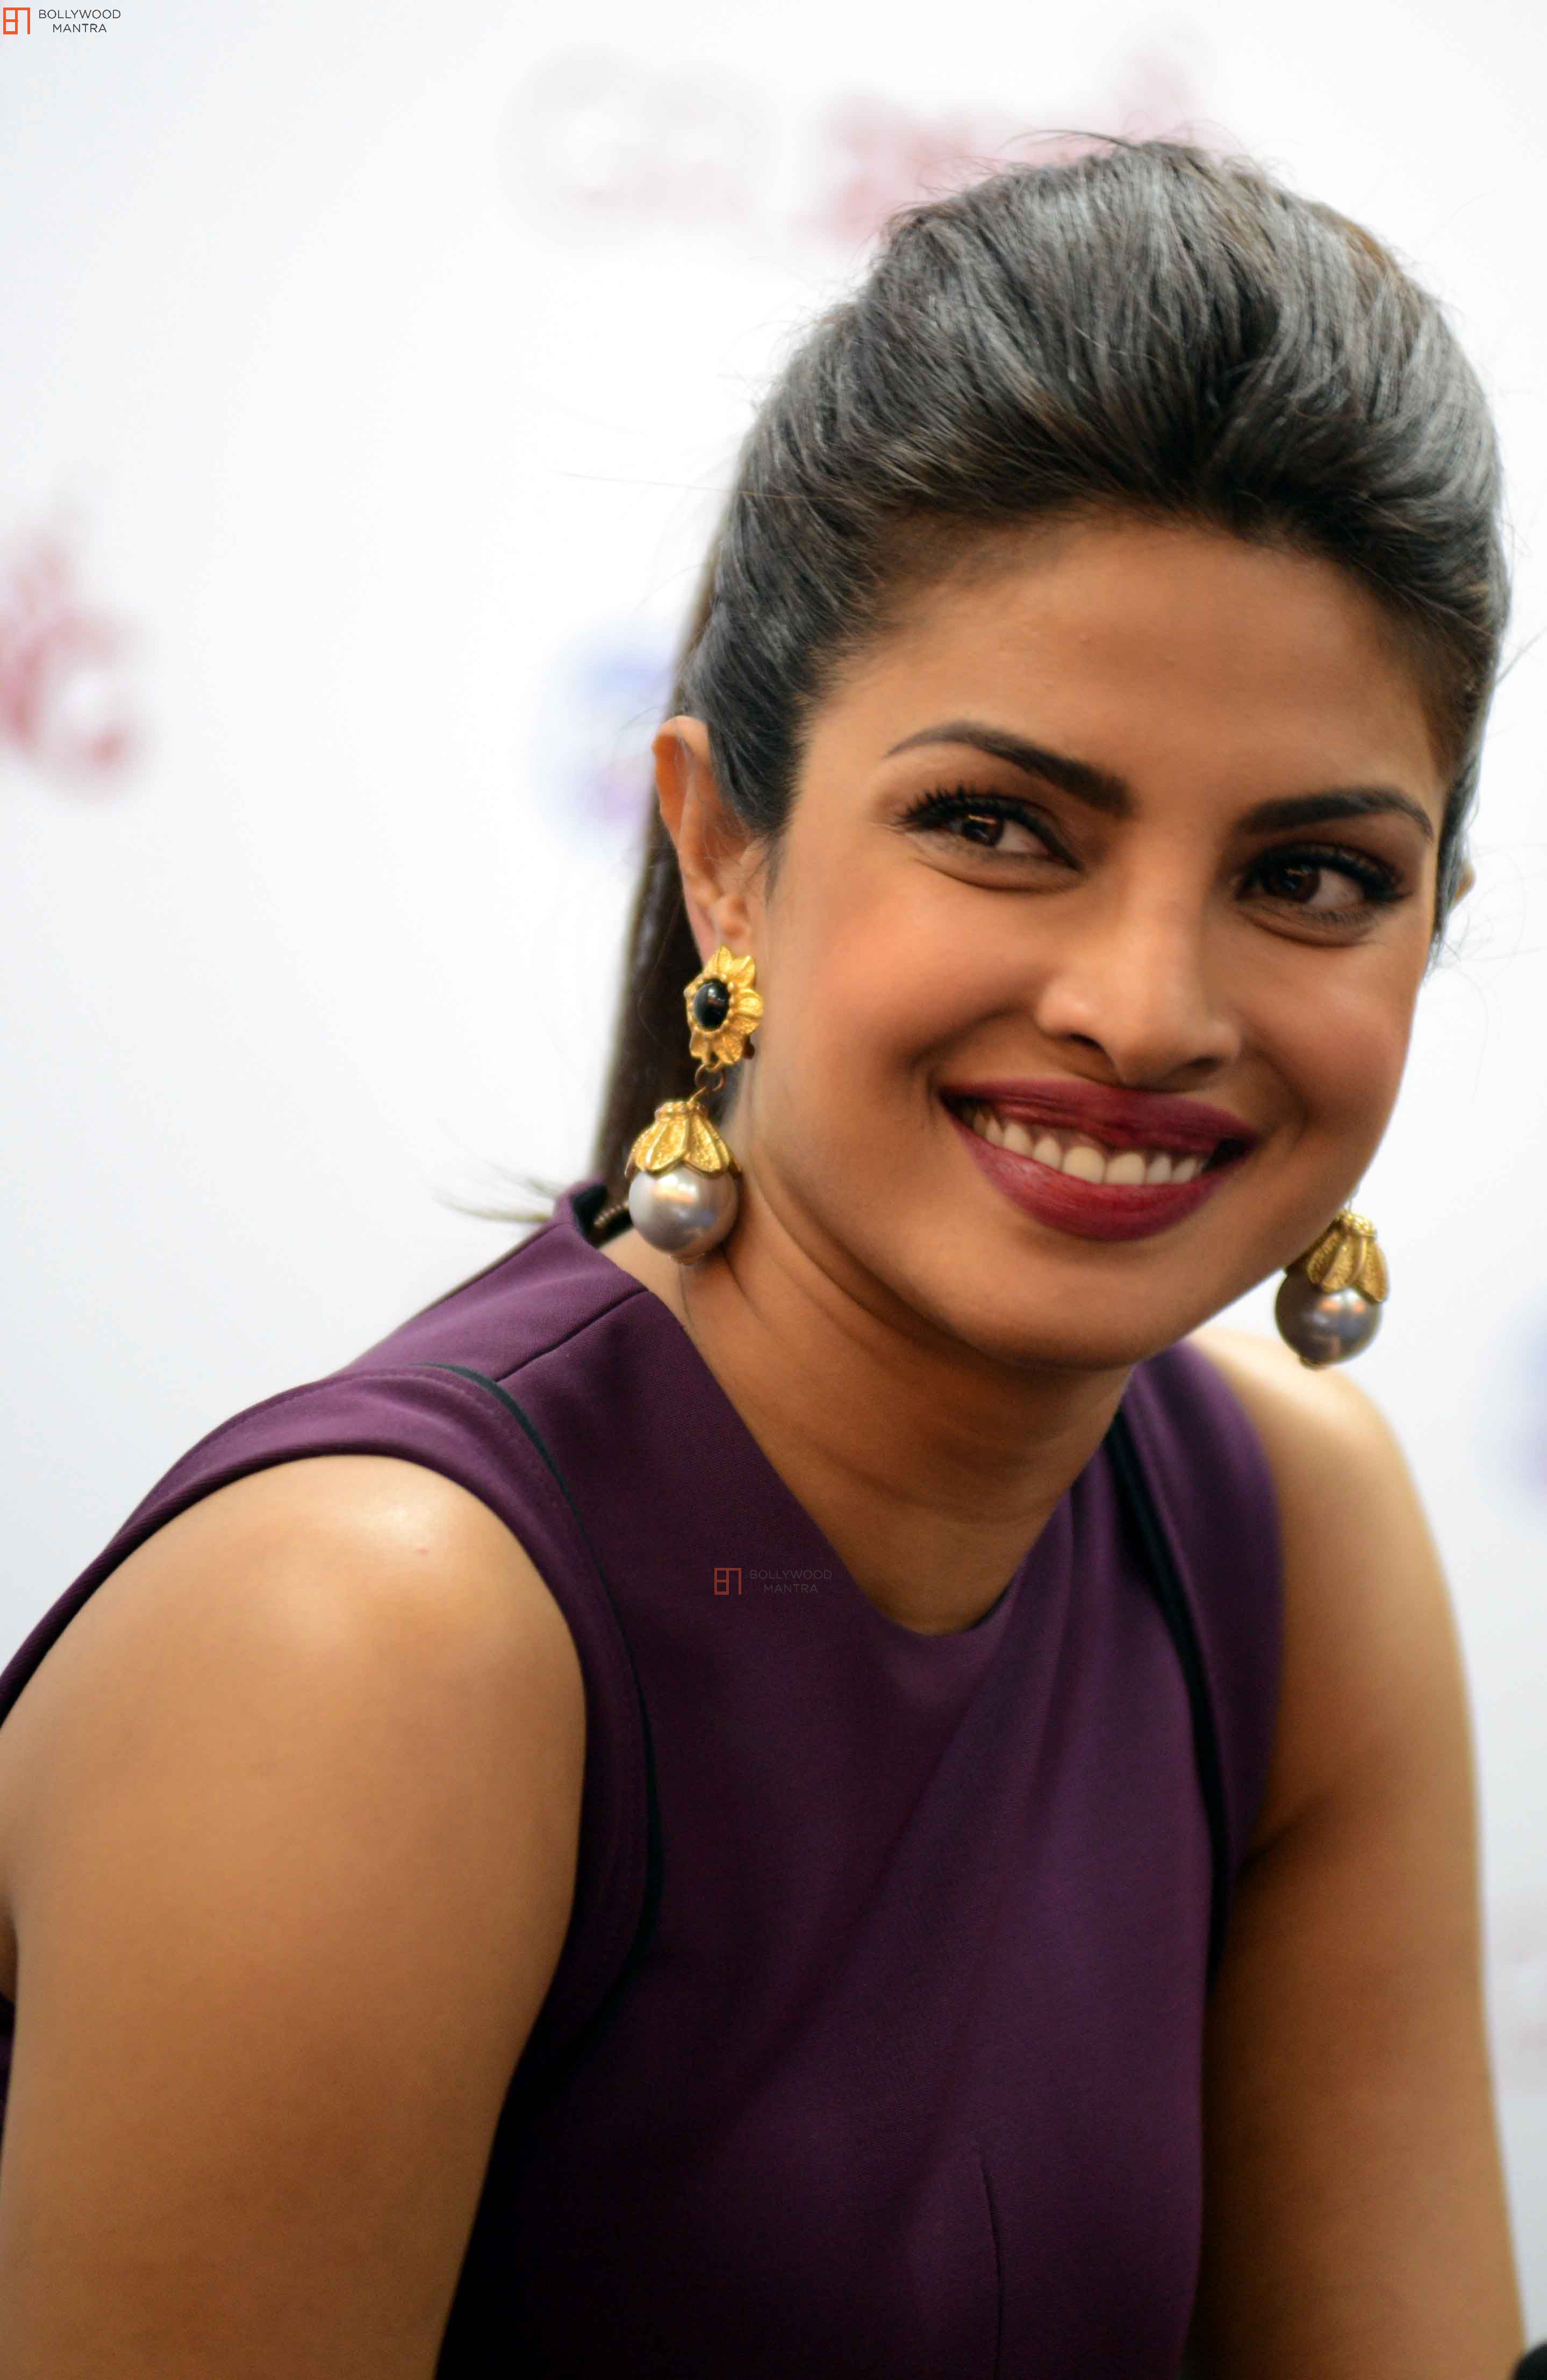 Bollywood Actress Priyanka Chopra Is Adding One After Another Feature